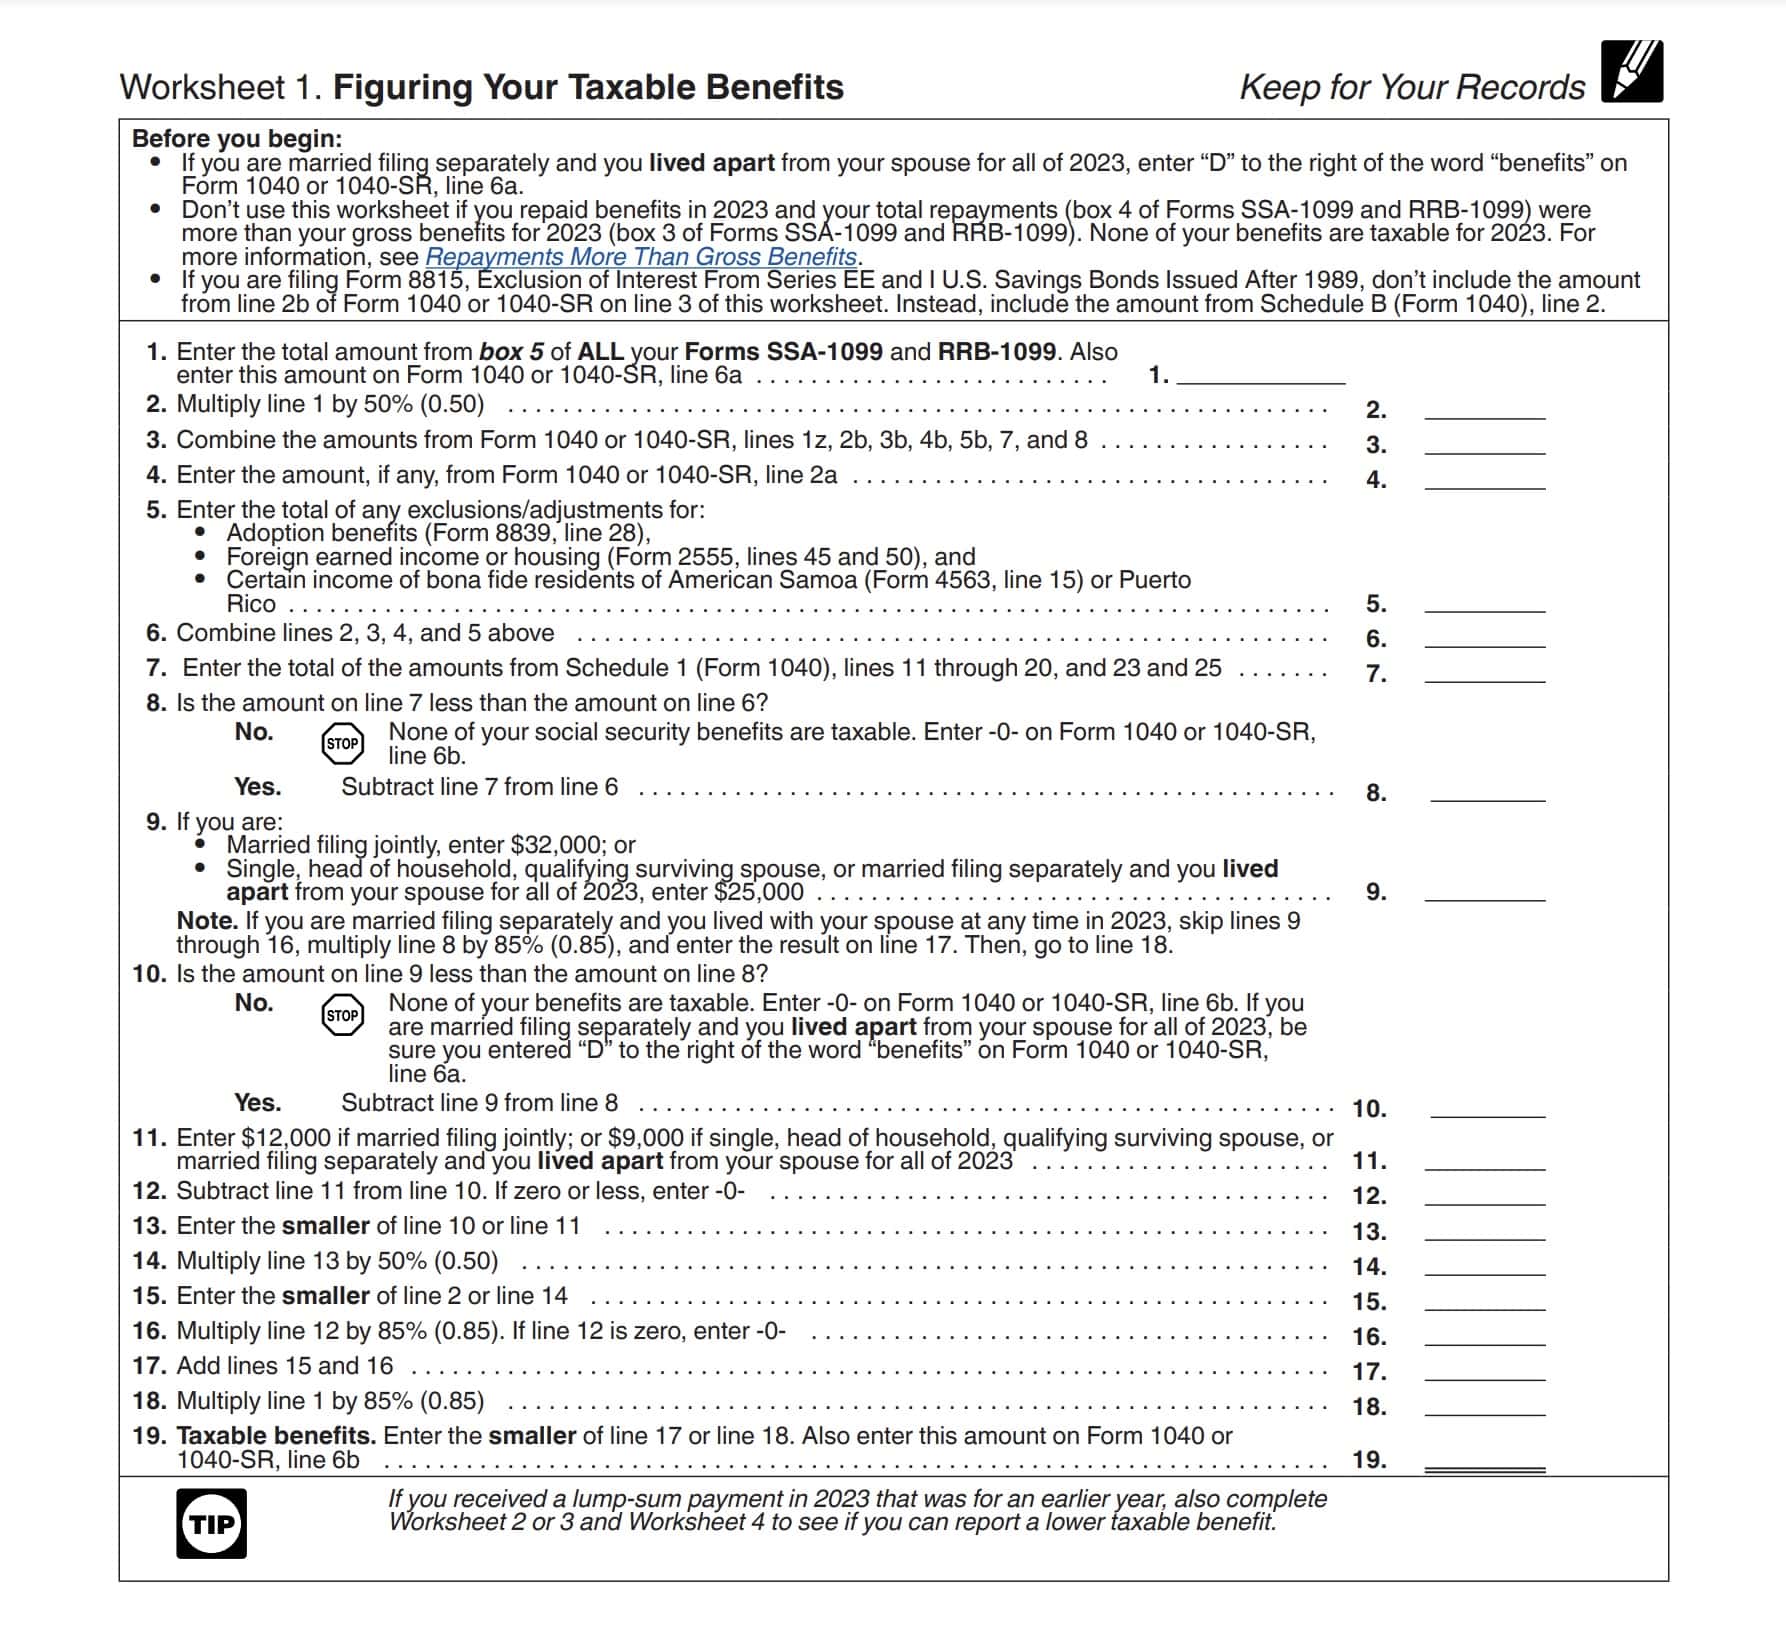 worksheet 1: figuring your taxable benefits